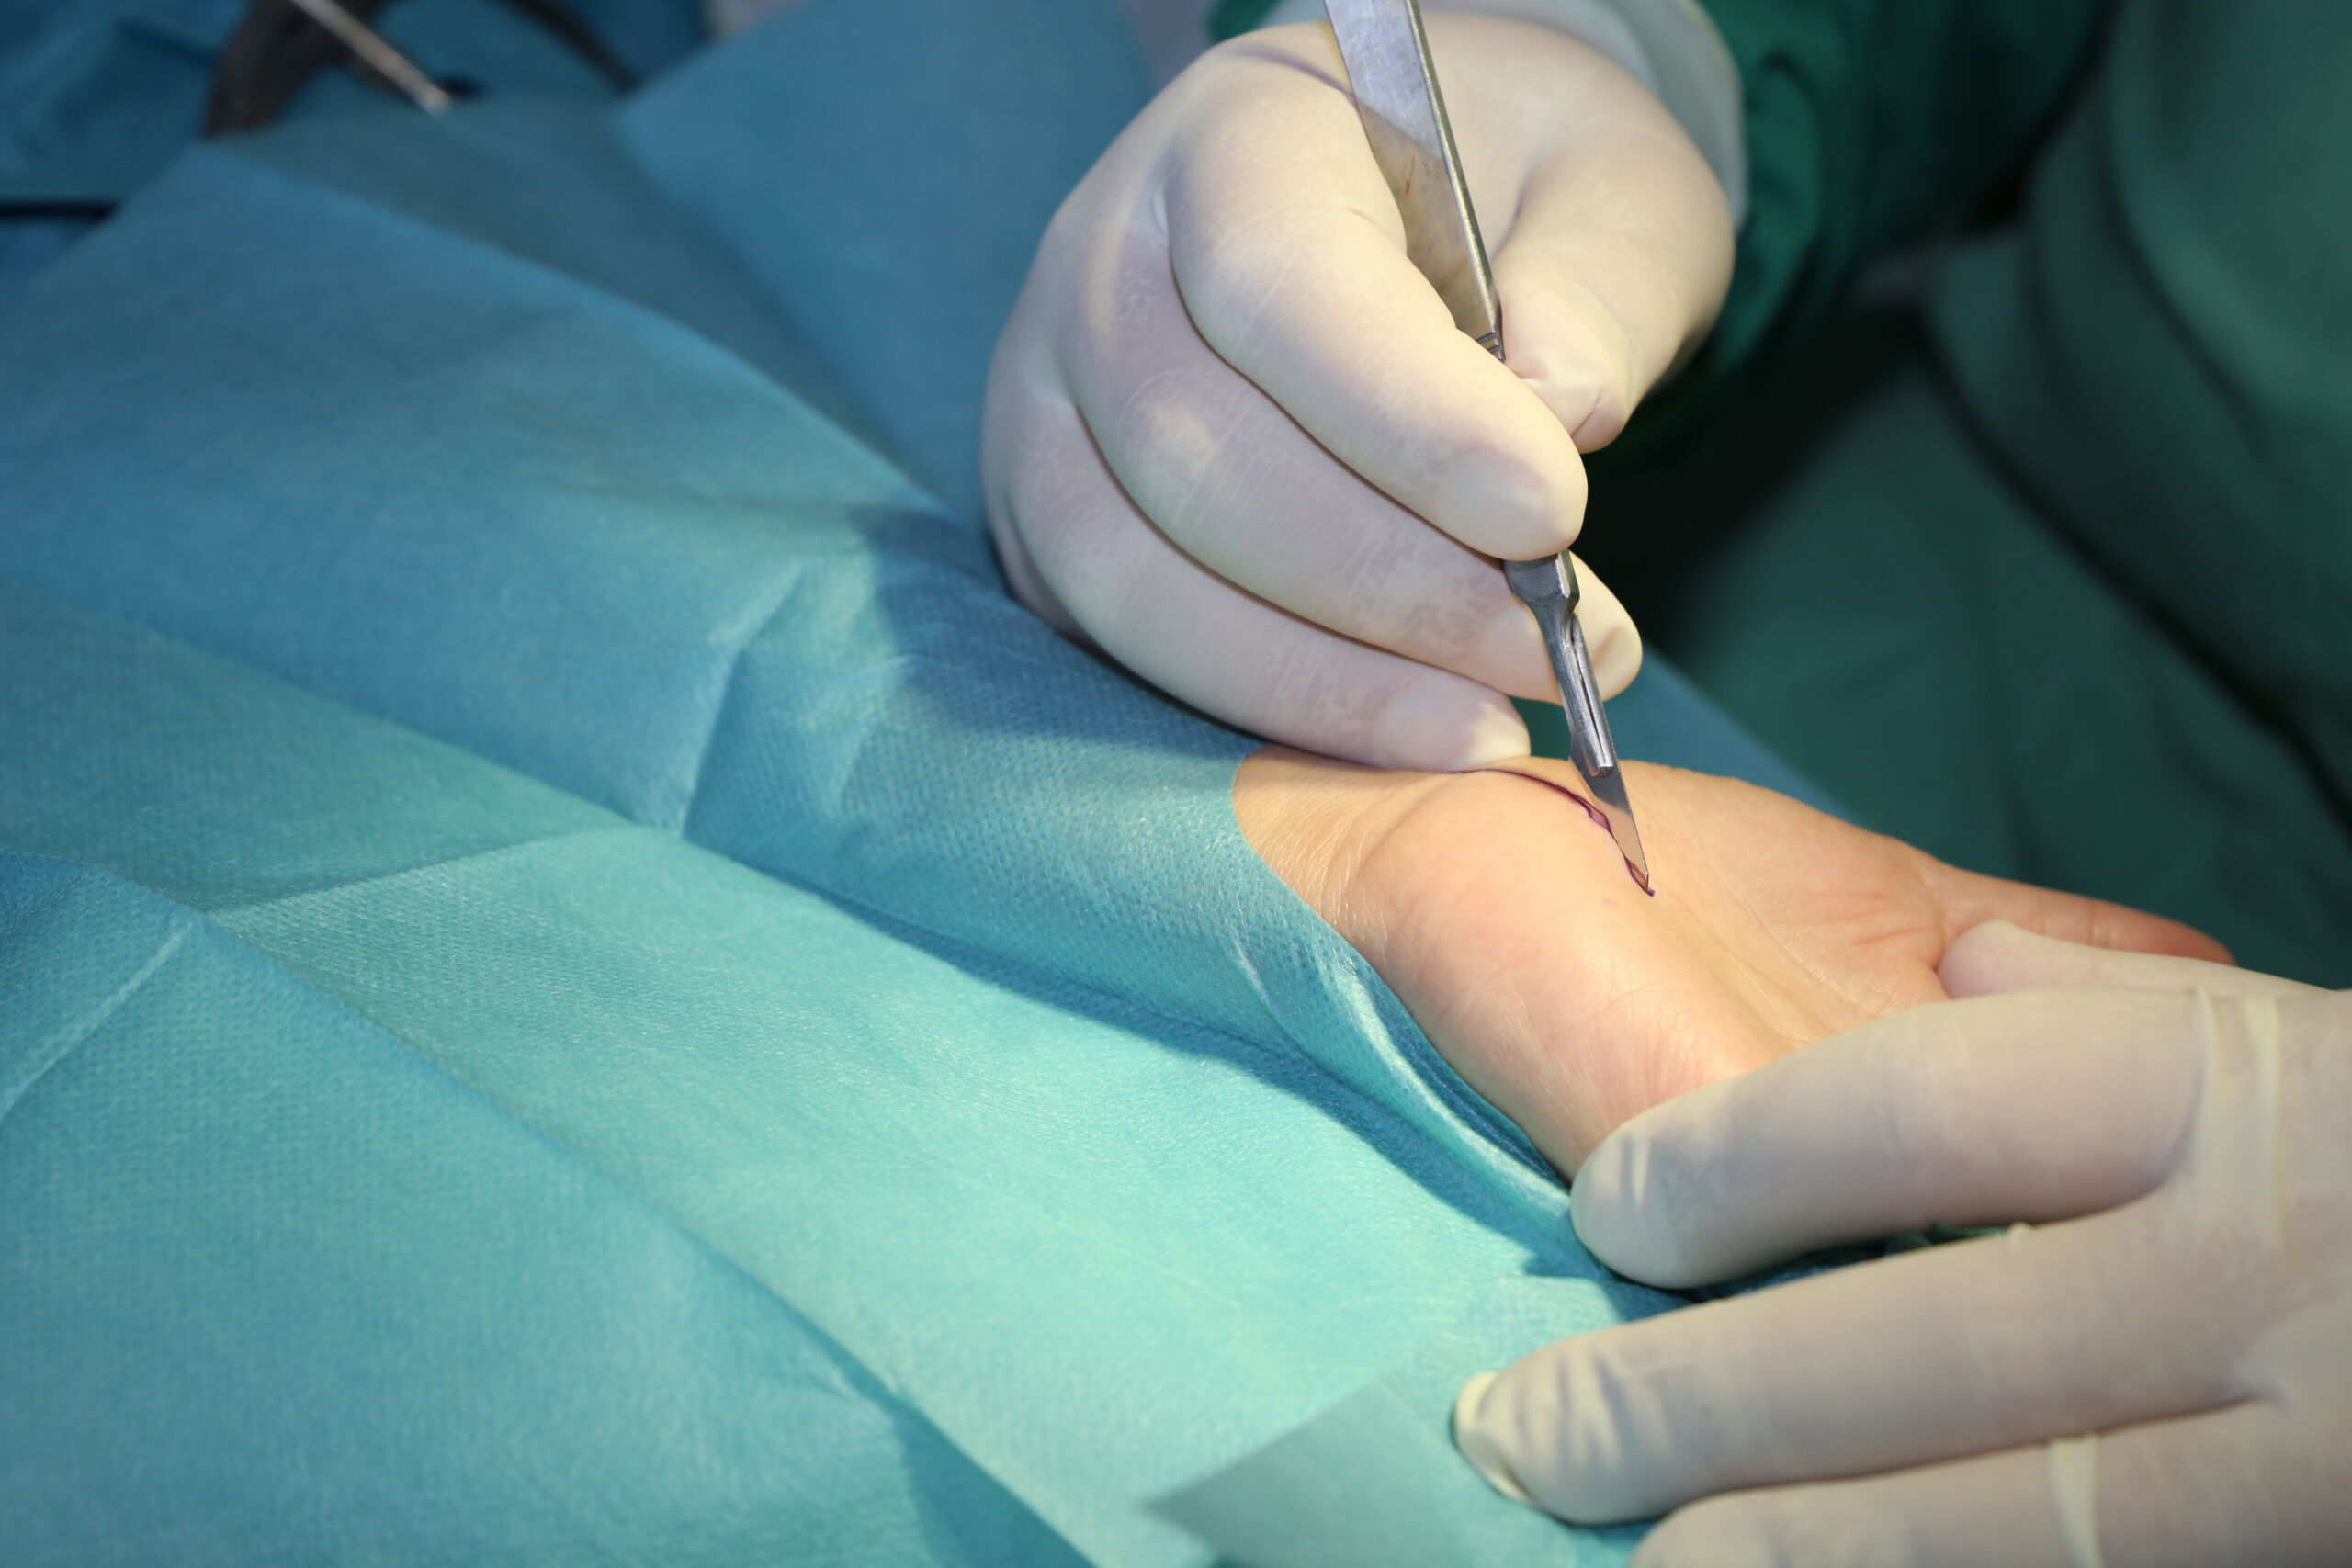 Surgeon making incision for carpal tunnel surgery